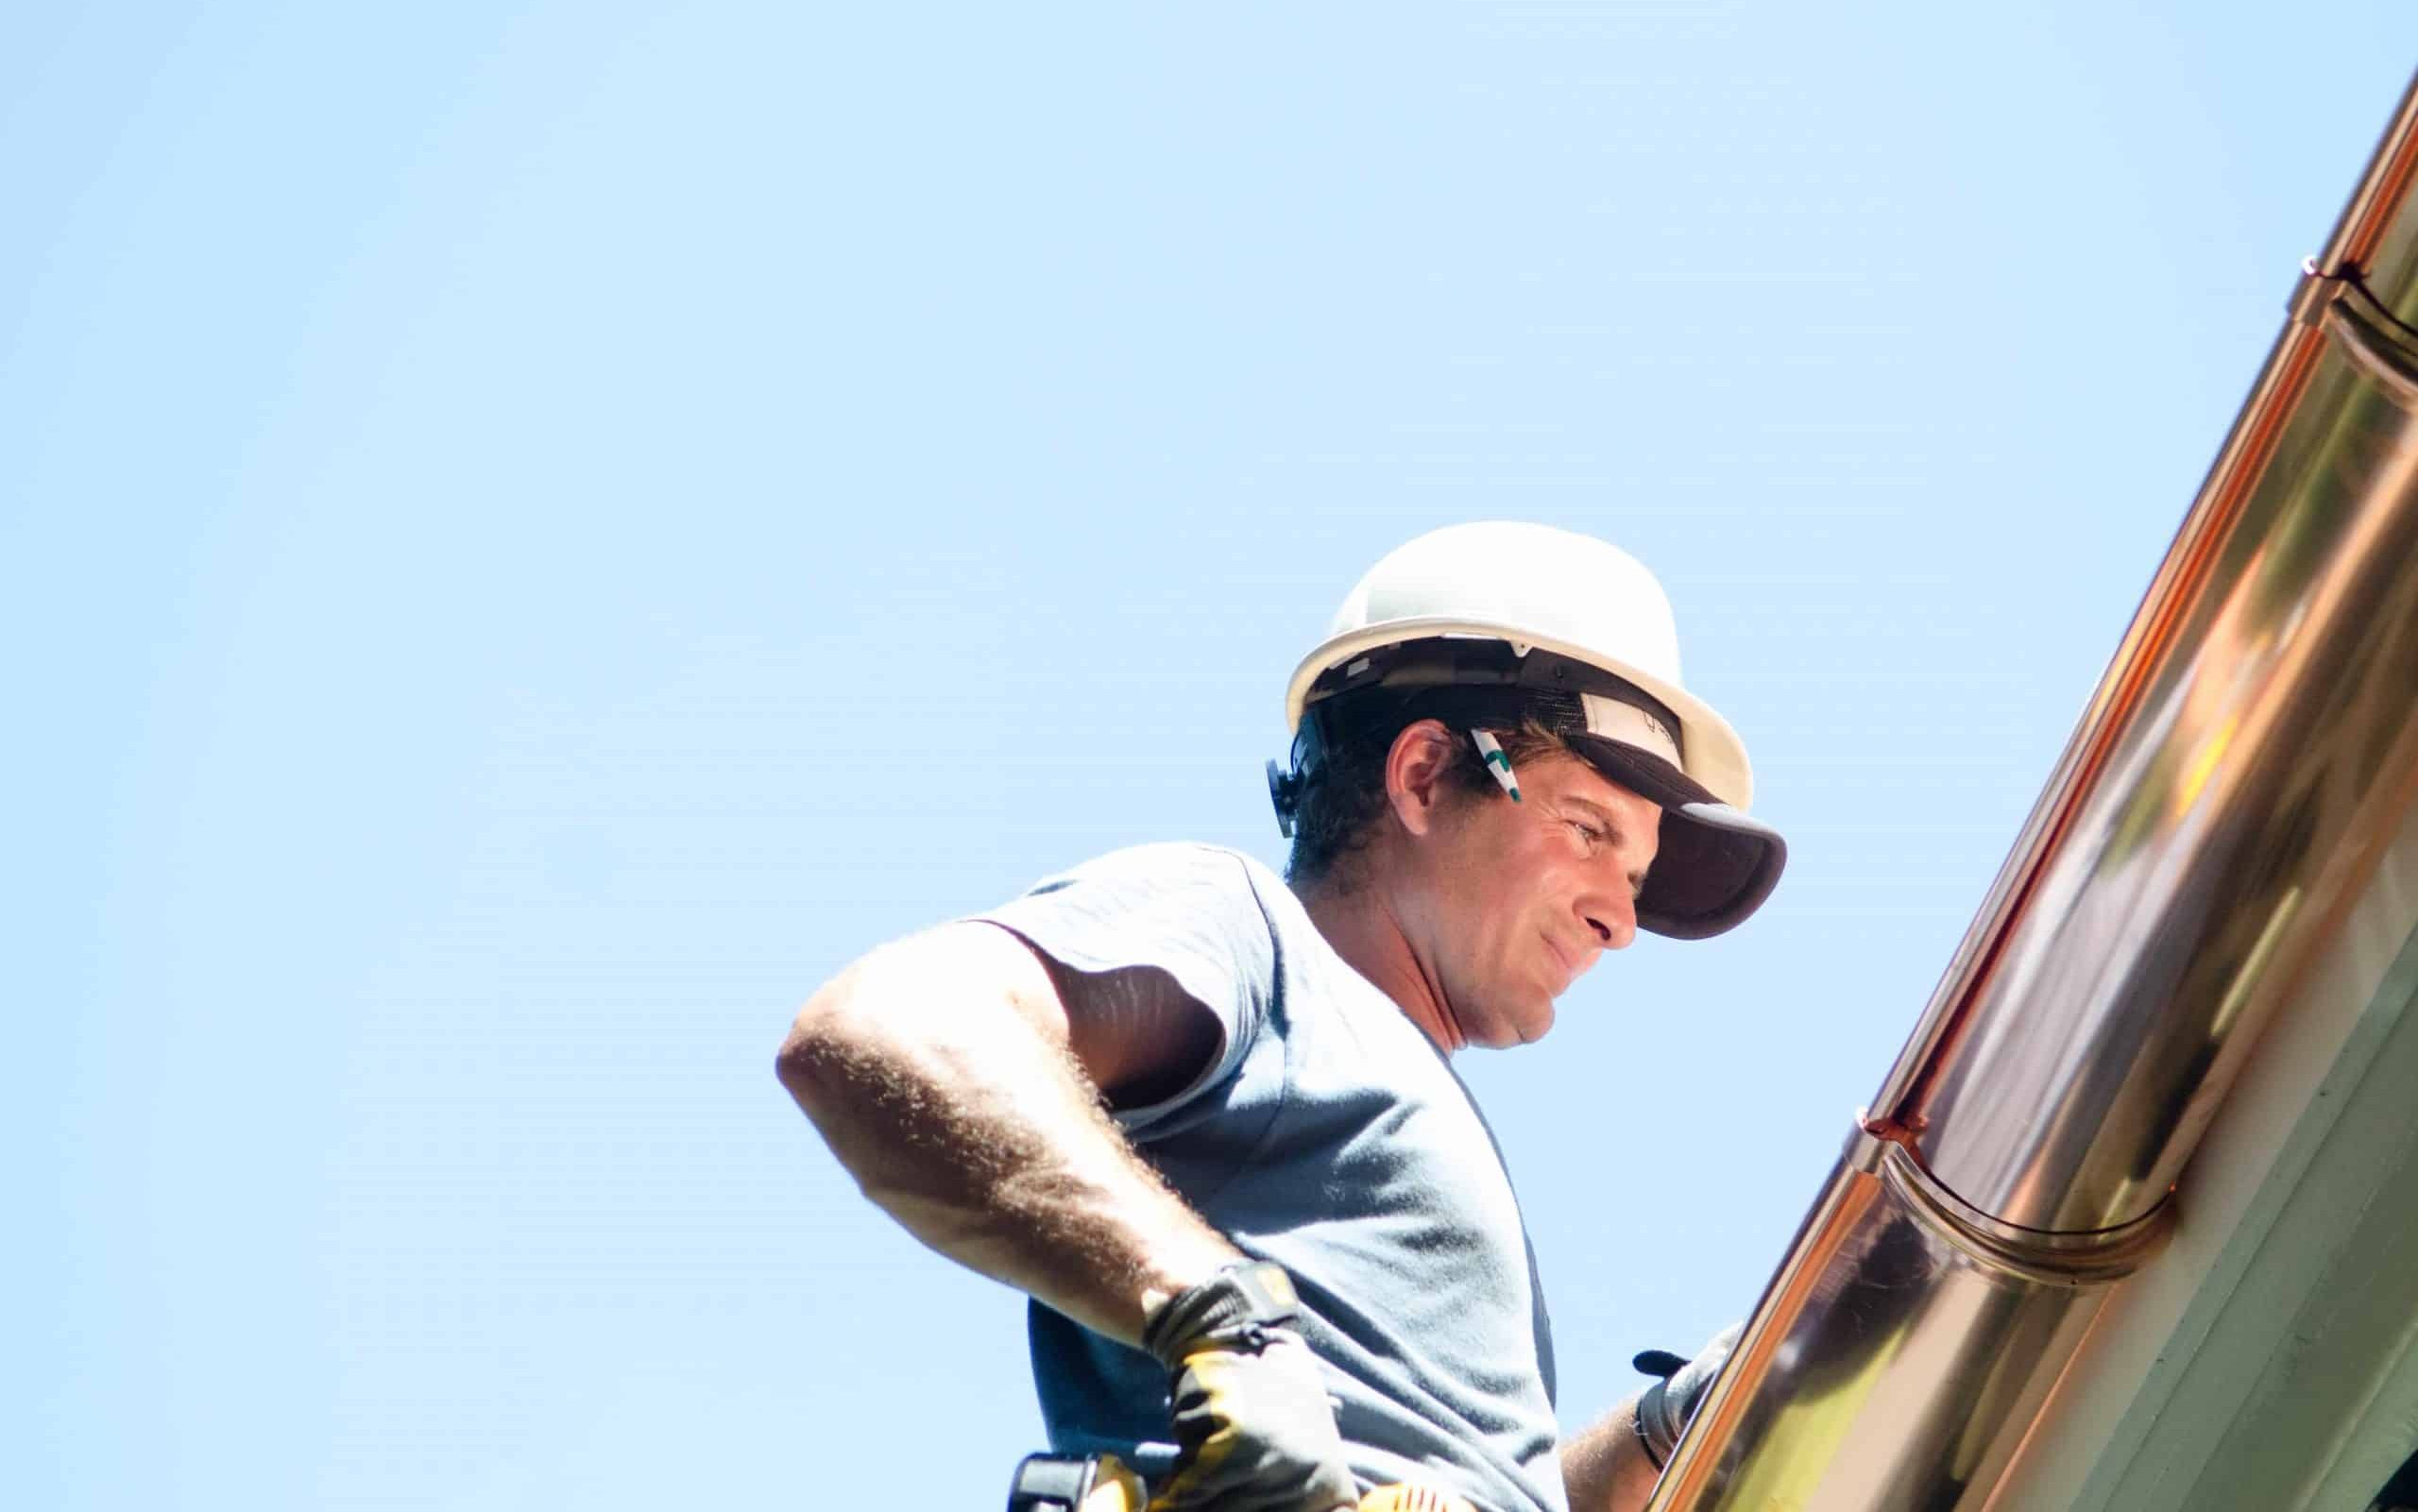 Gutter Contractor in Lehi and Orem, UT